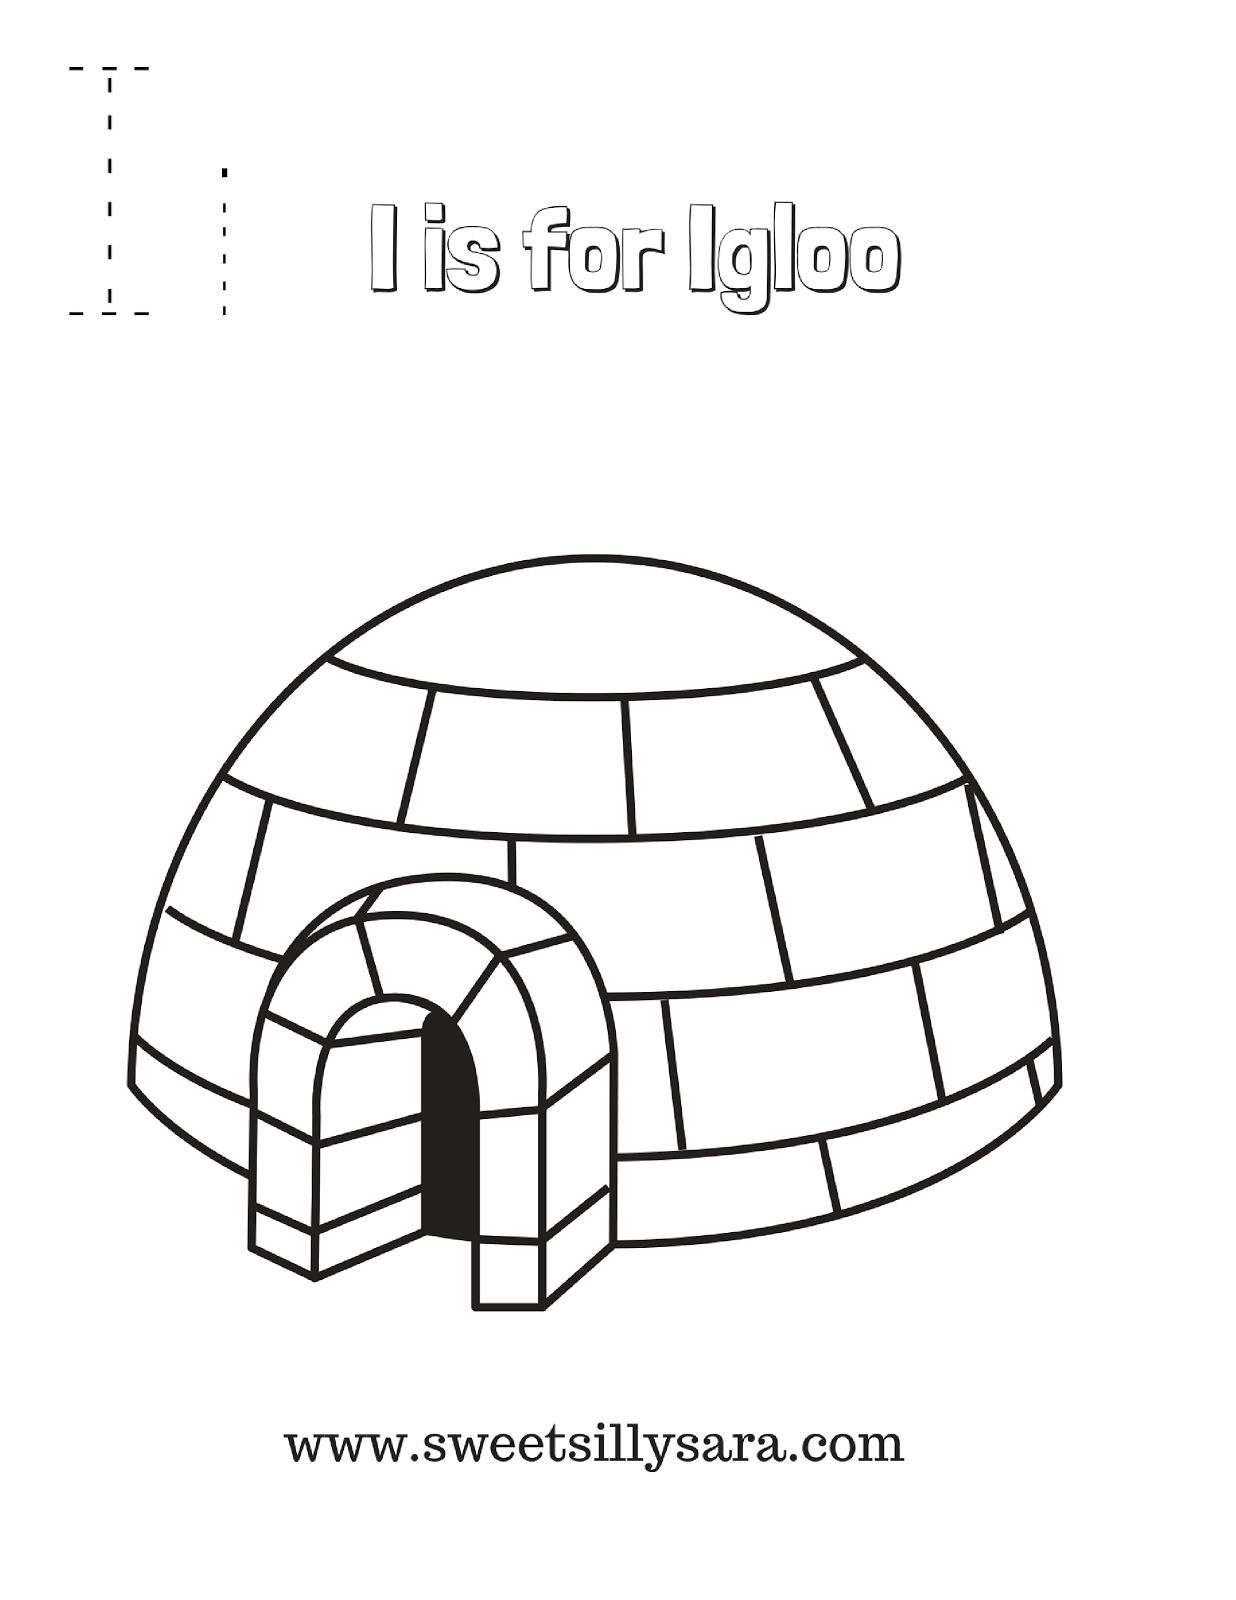 Sweet silly sara print the i is for igloo coloring page